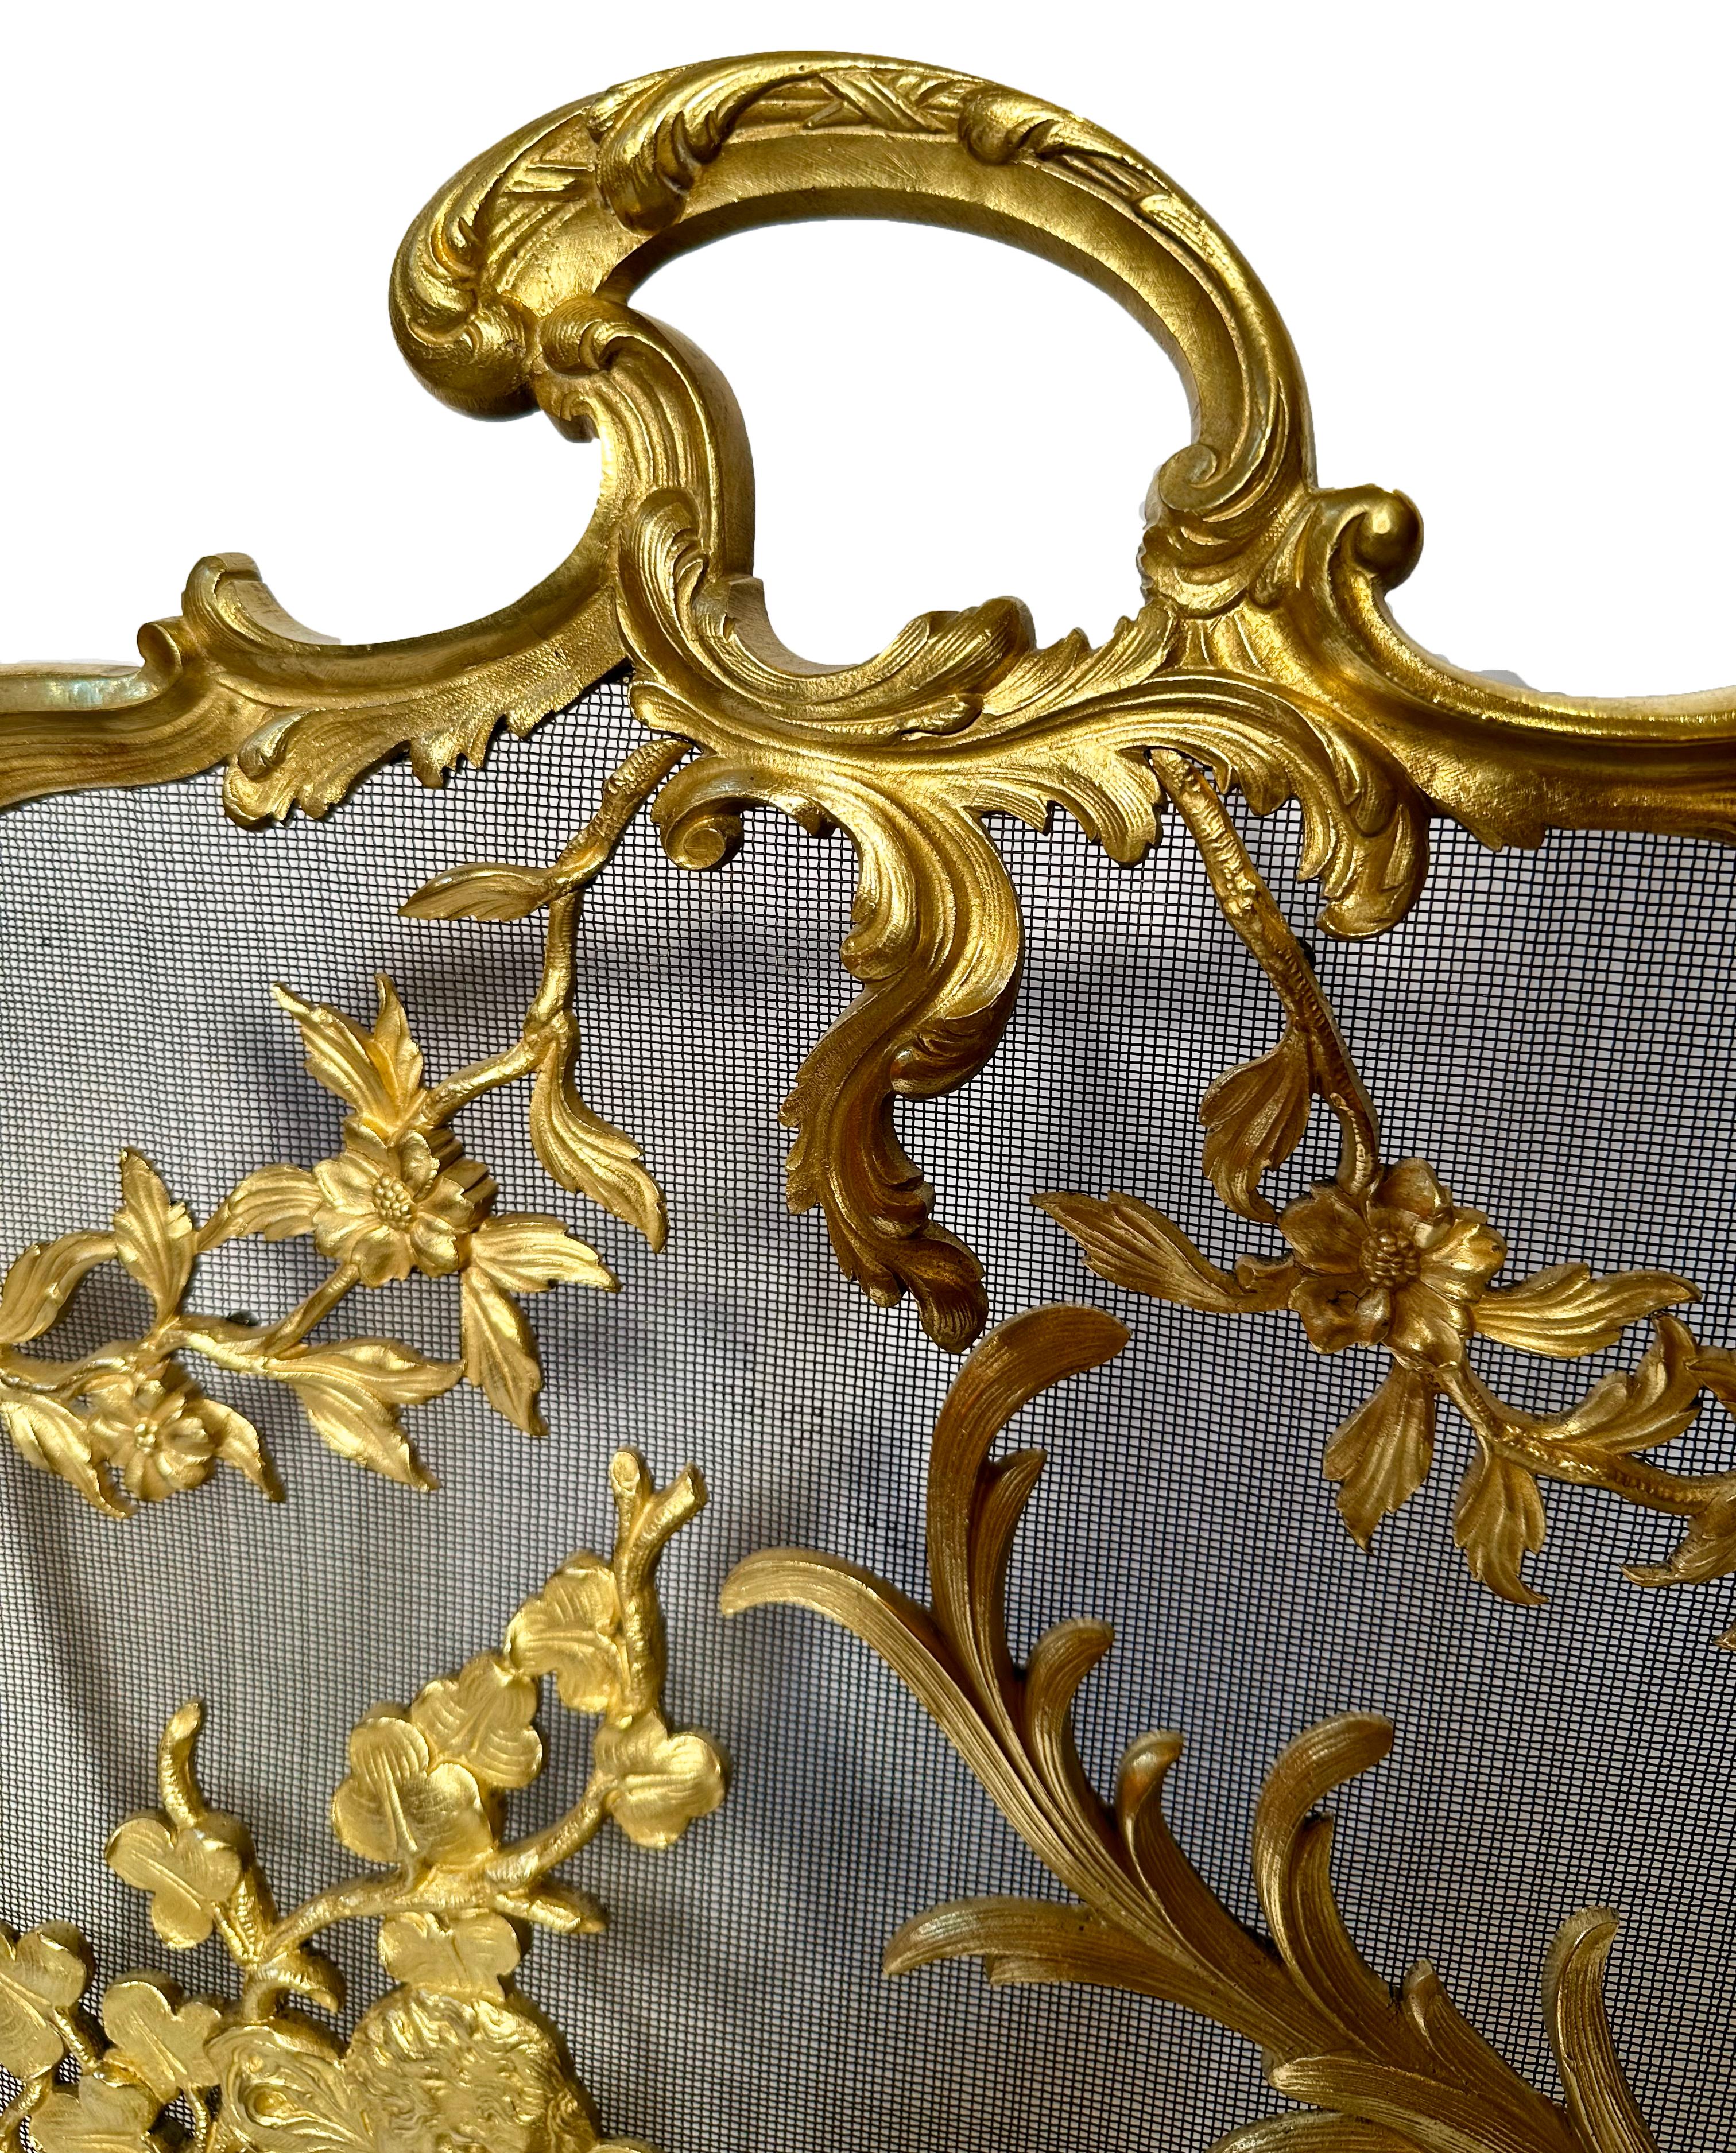 Antique 19th Century French Gold Bronze Fire Screen, Circa 1880-1890.
Finest Quality Workmanship.